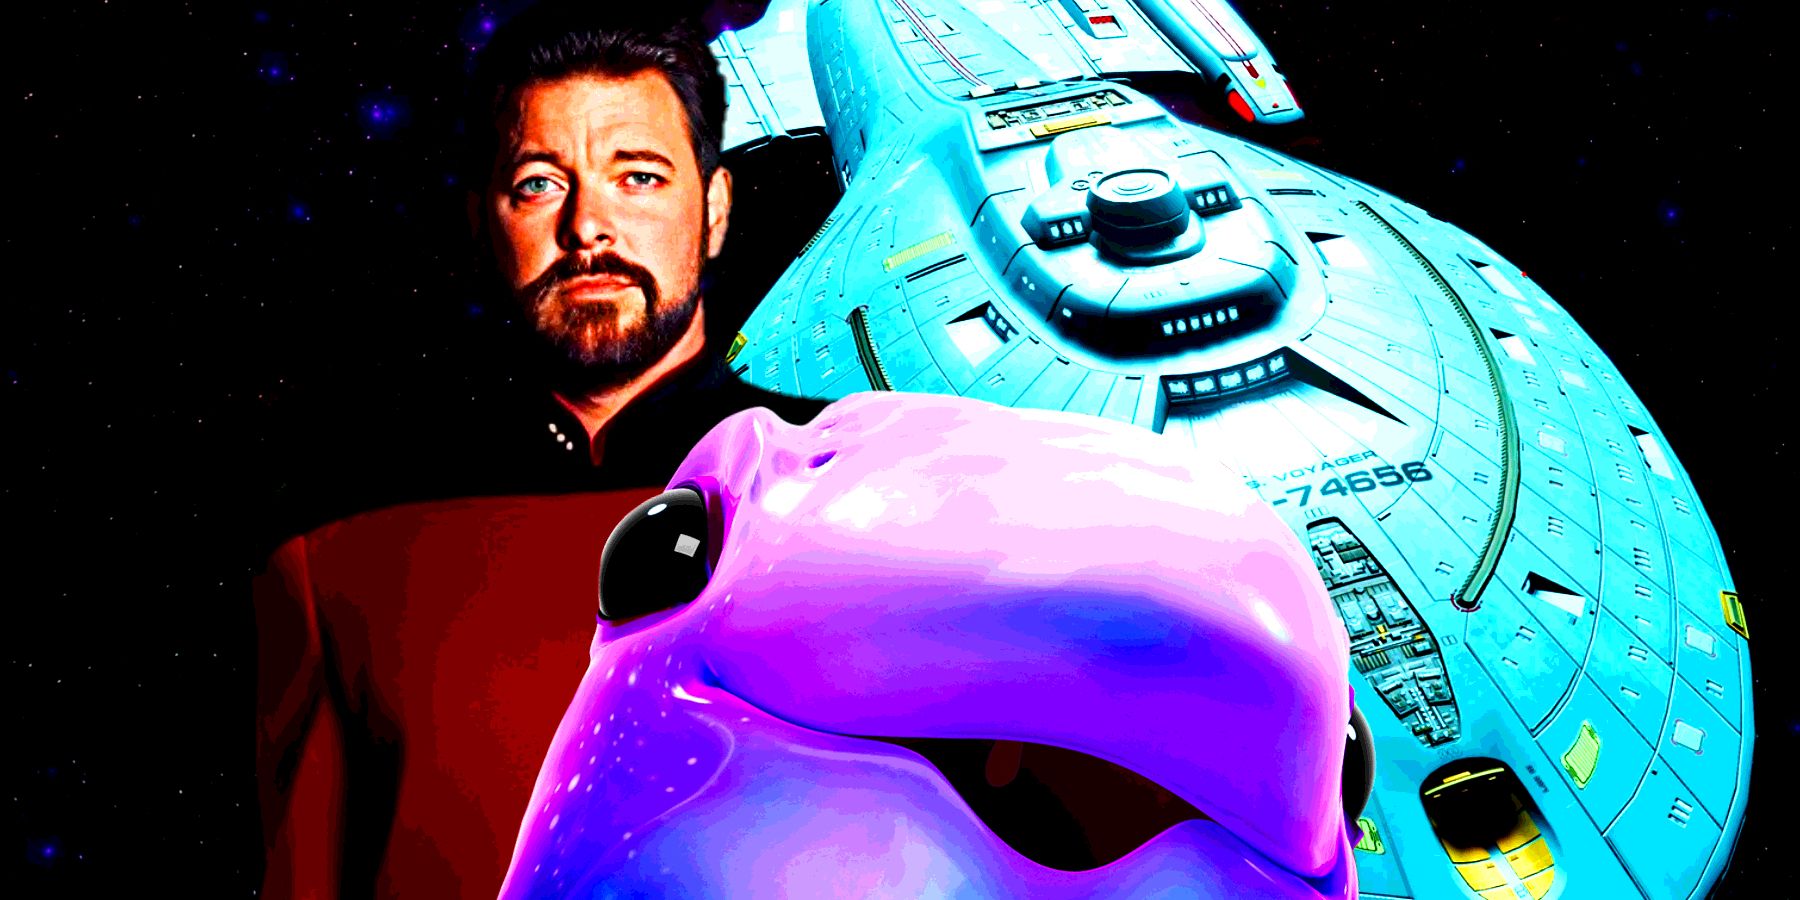 Riker, Murf and the USS Voyager